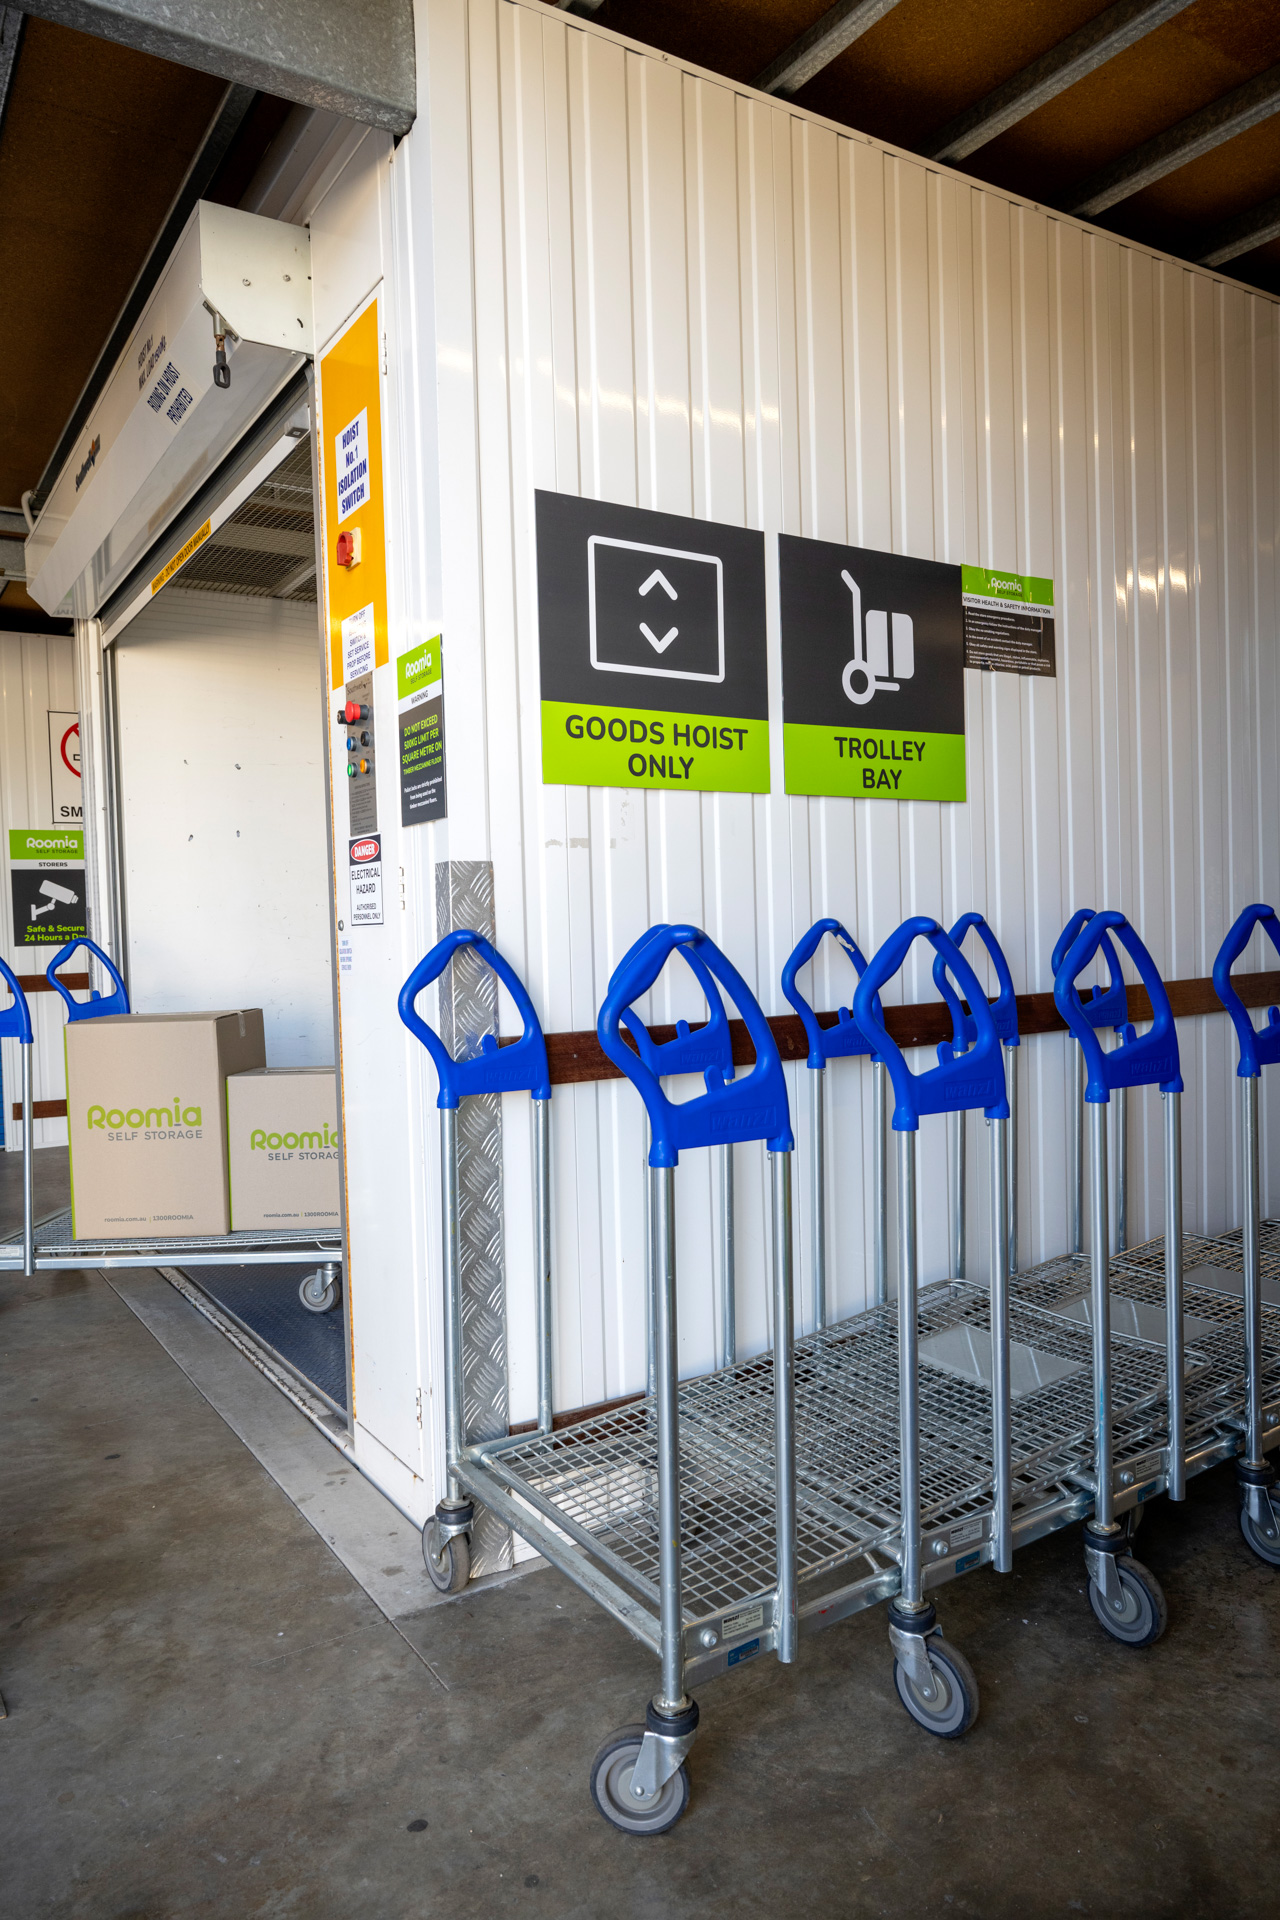 Convenient onsite trolleys available for free use at the self storage facility, simplifying the process of transporting your items to and from your storage unit.